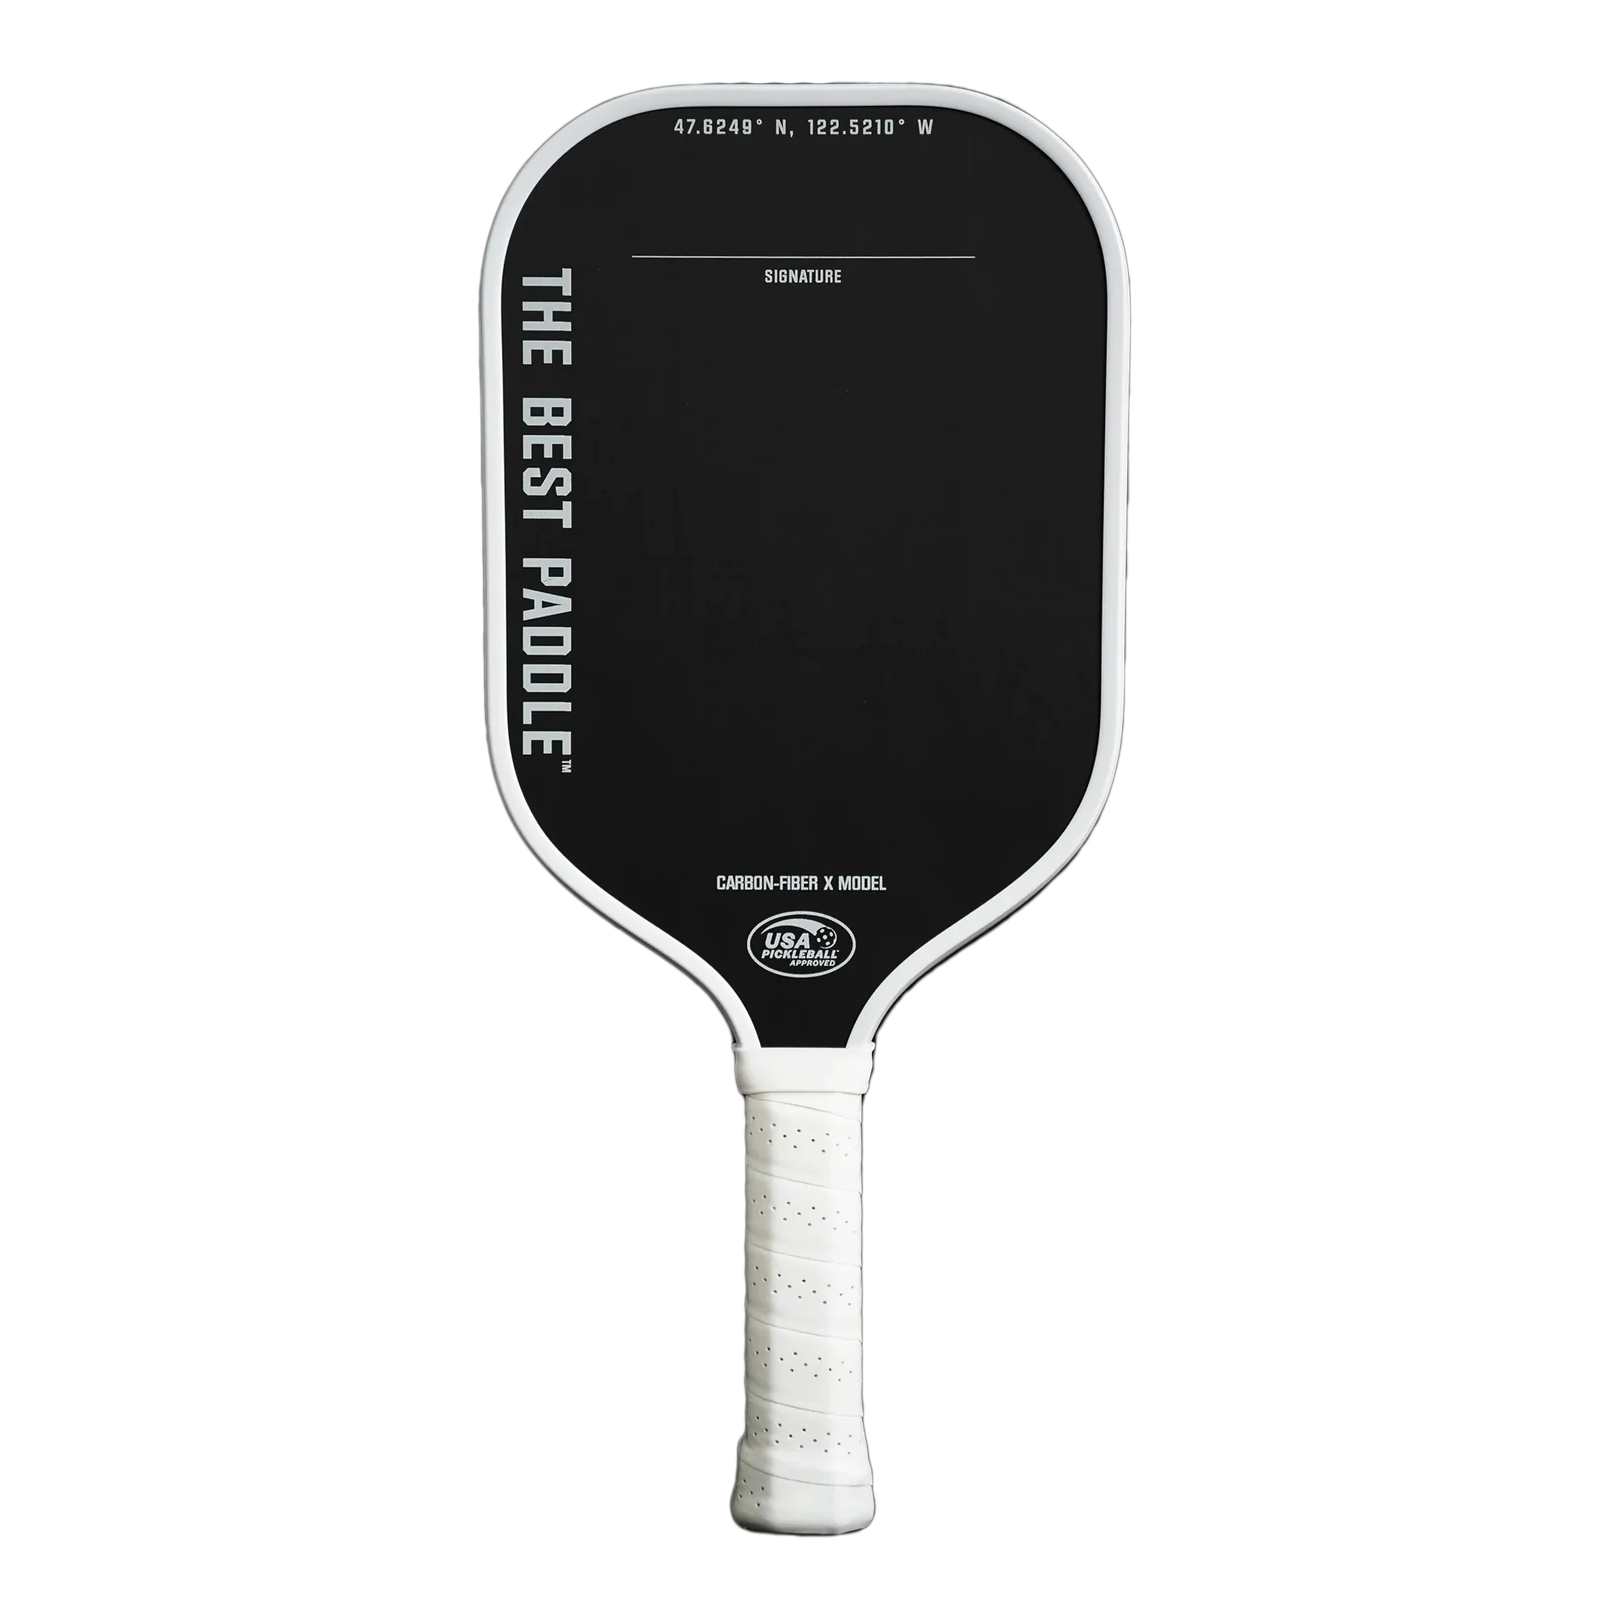 Back to OG. 70% power on paddle tennis still like a laser. Is the paddle  matter much in pickleball? Too bad i can only do 90sec reel